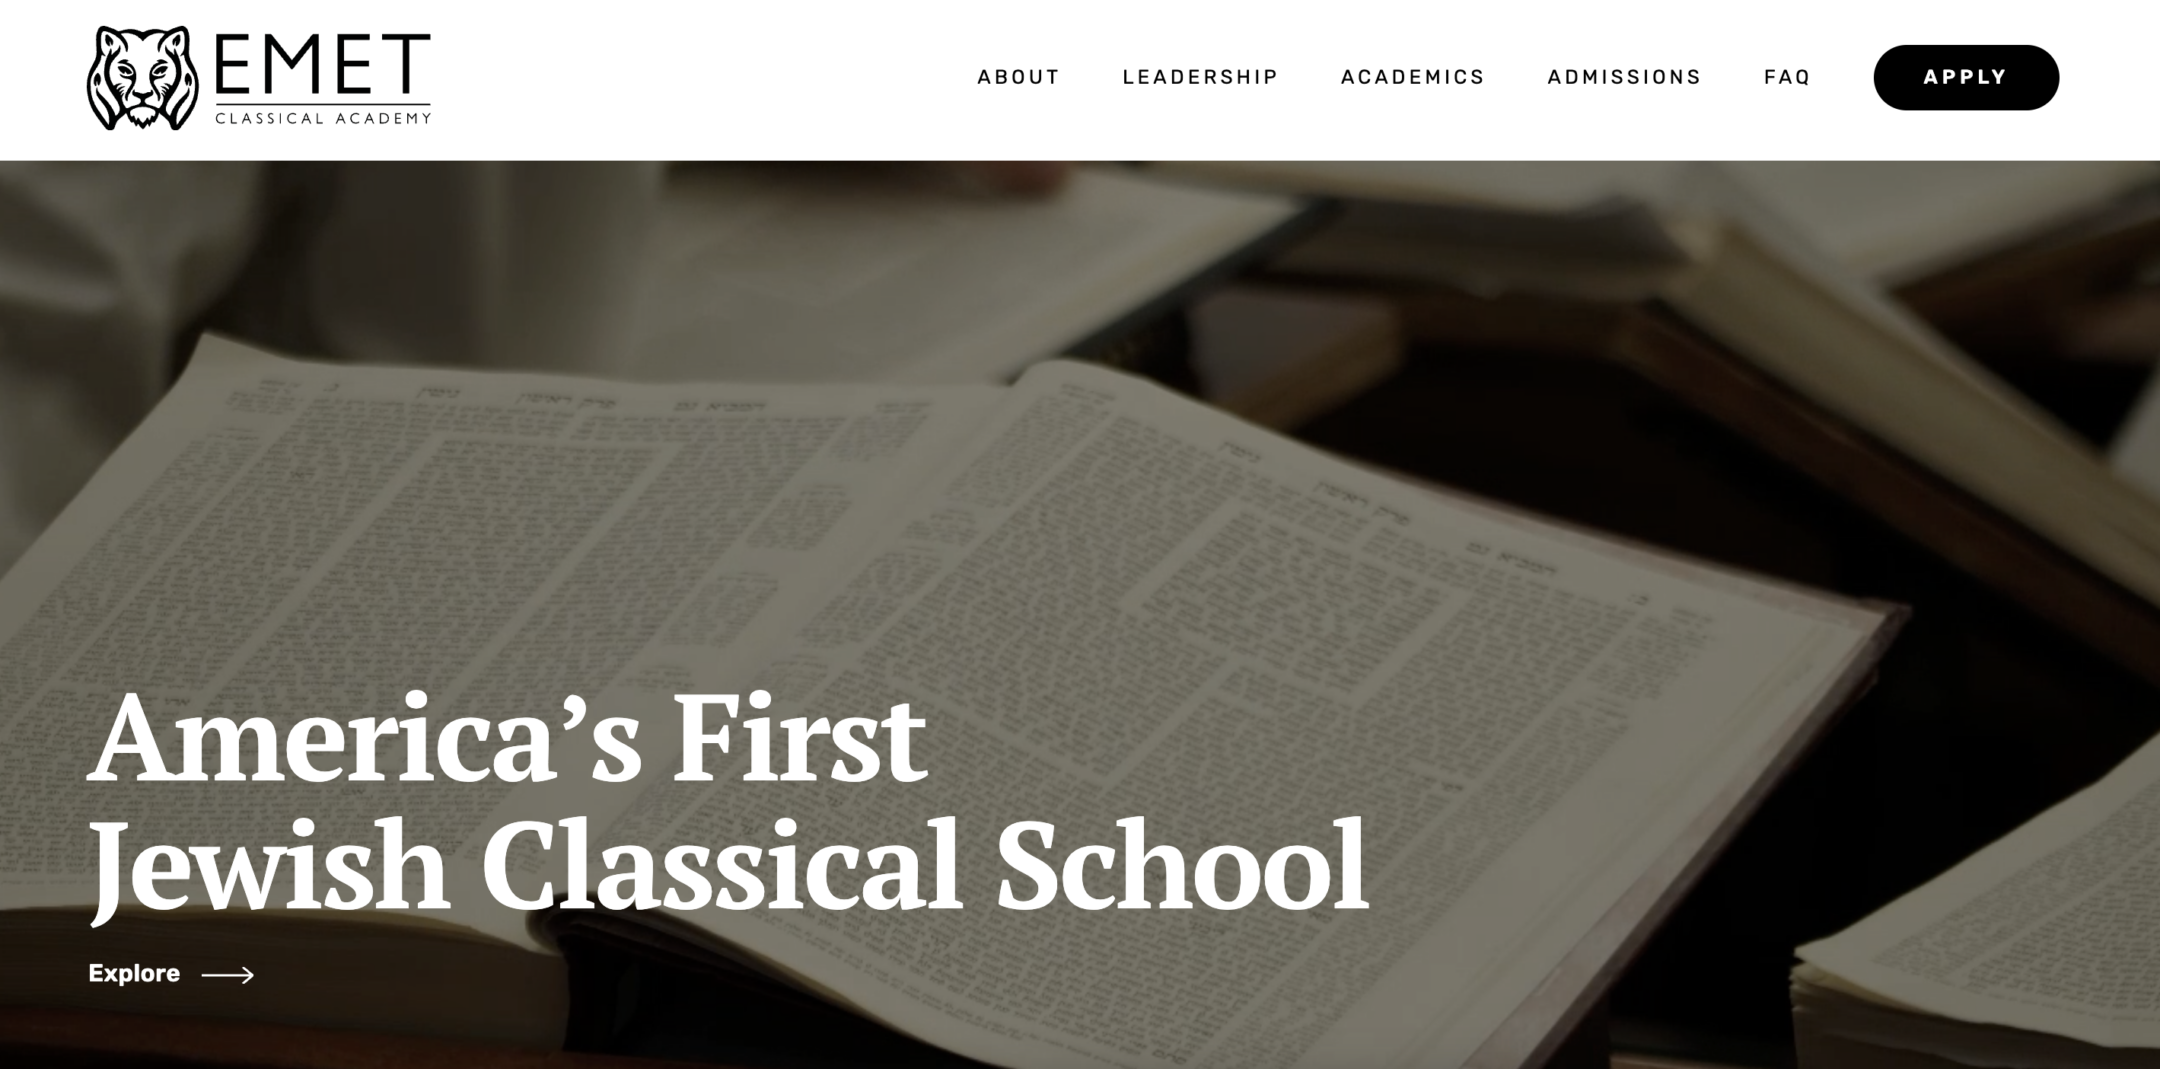 Emet Classical Academy’s website emphasizes how it will be different from other Jewish schools. (Screenshot)